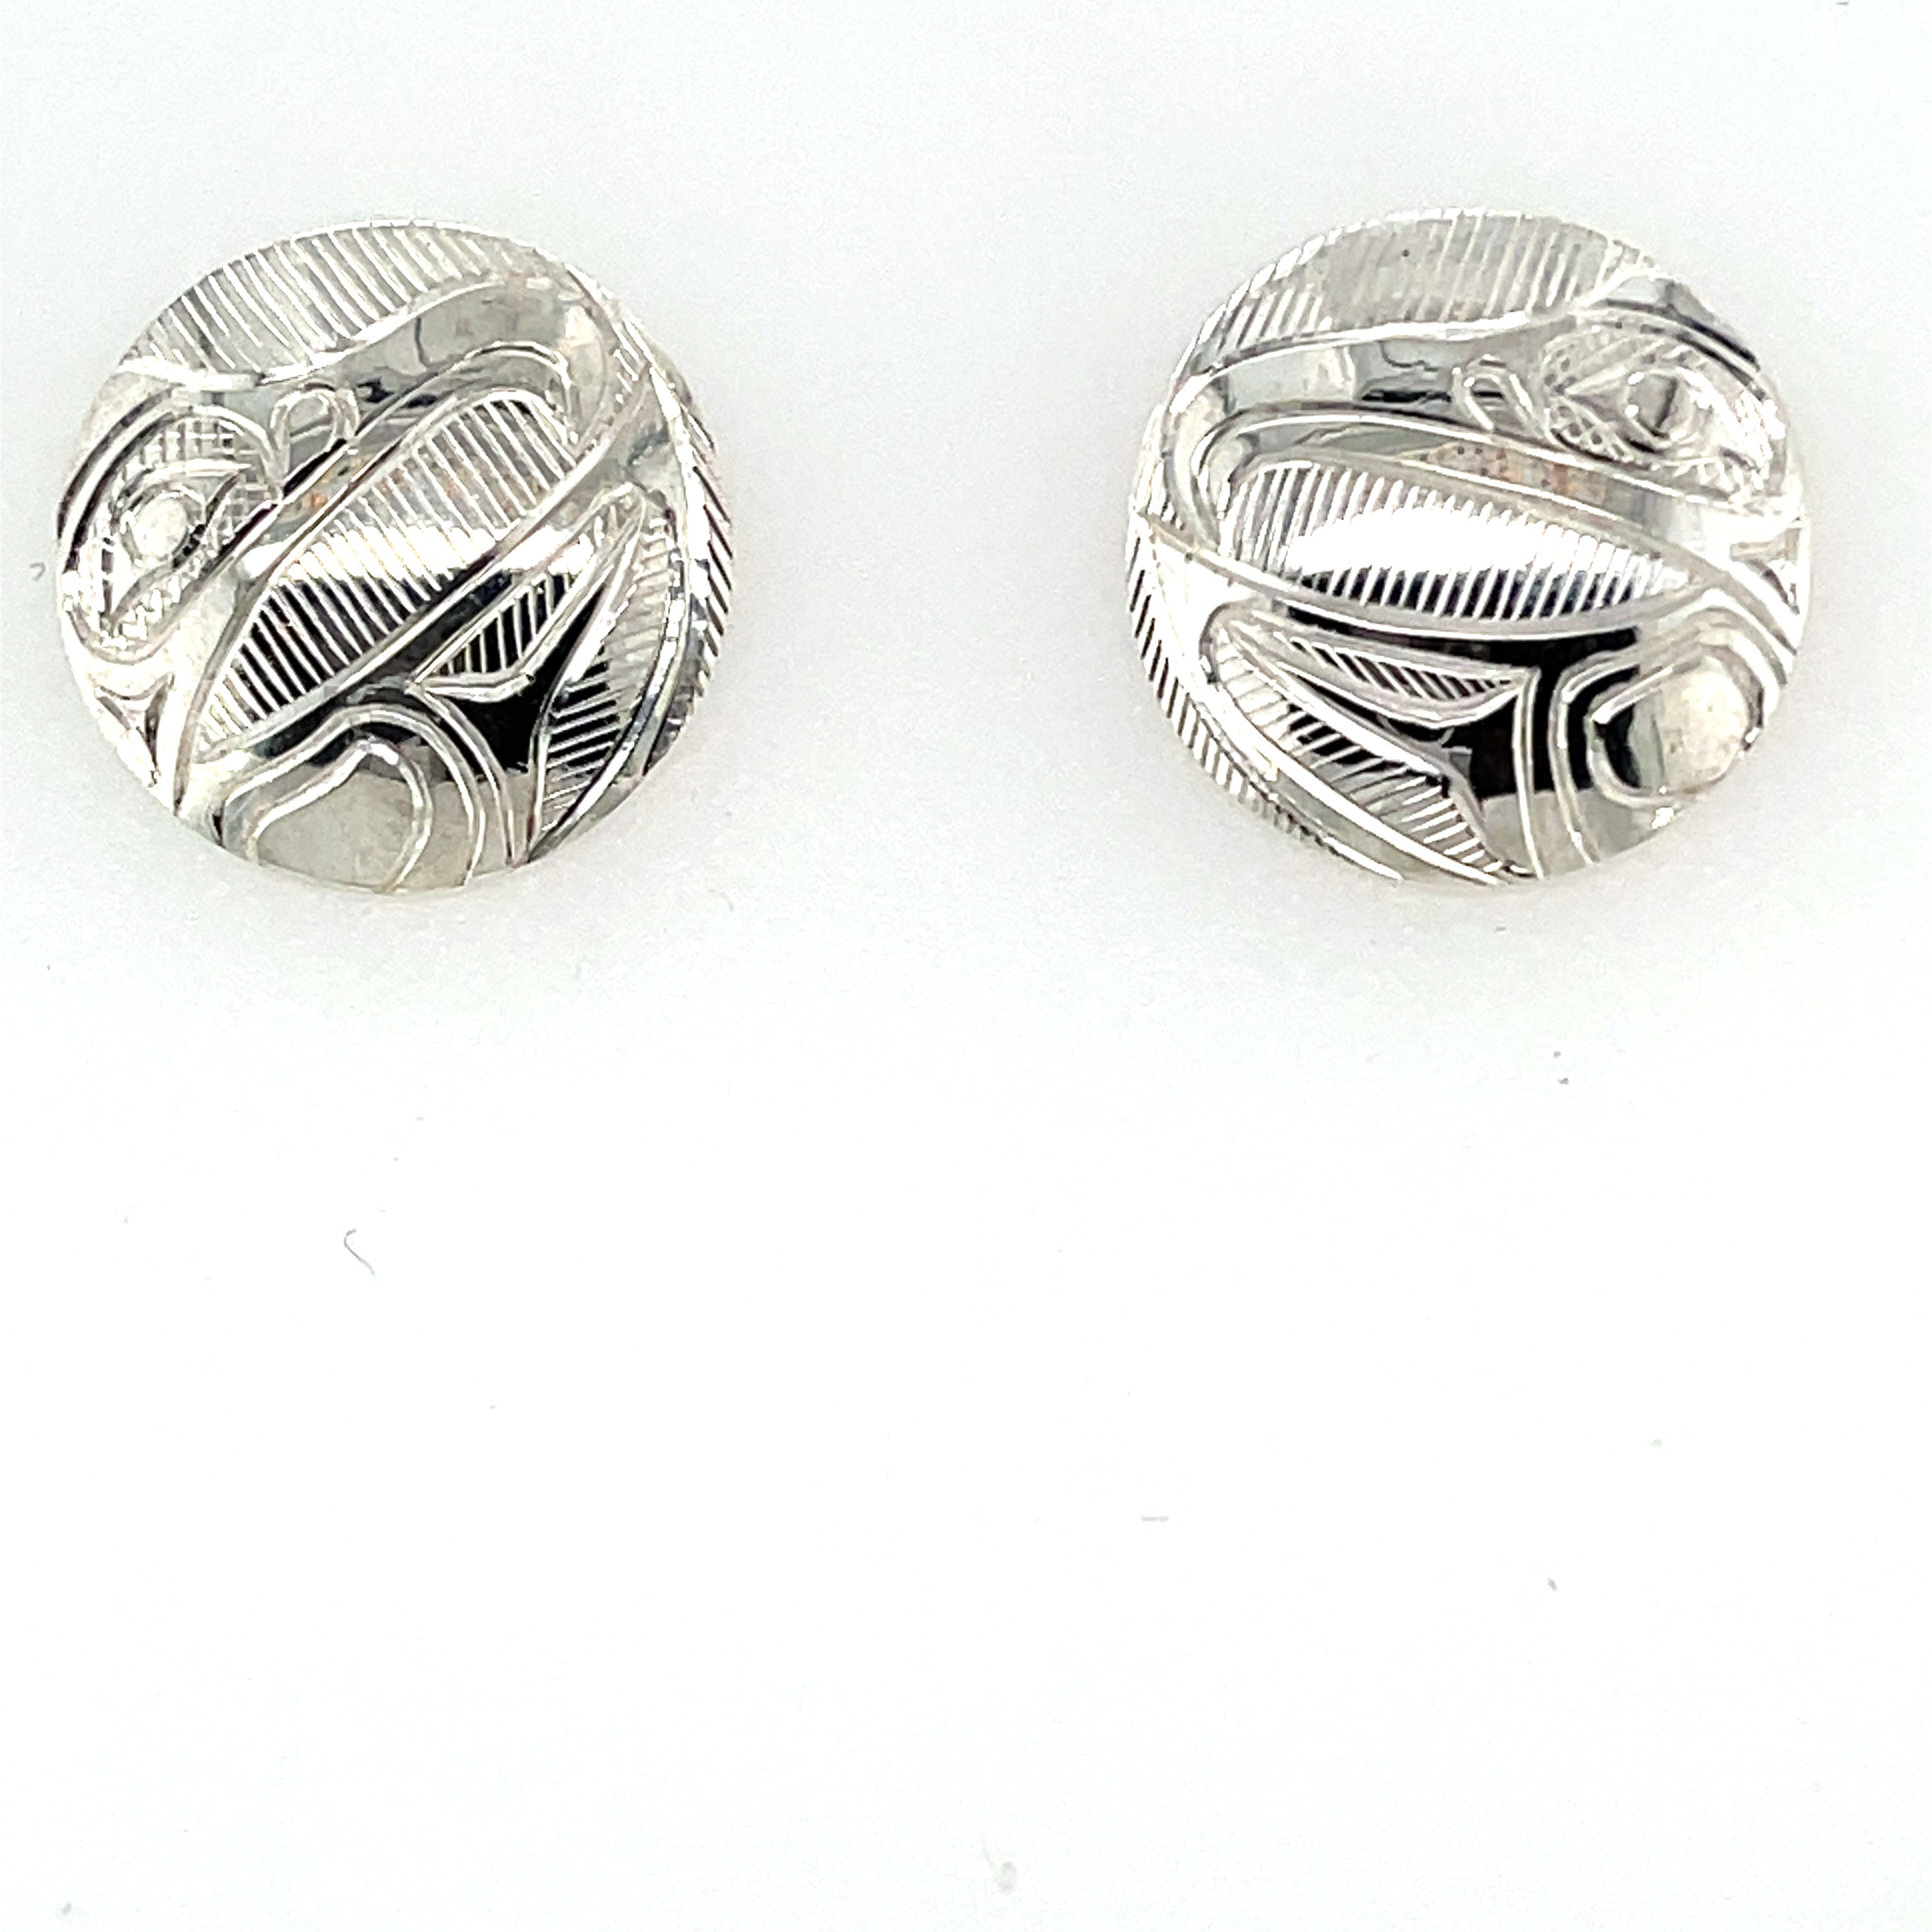 Earrings - Sterling Silver - Studs - Round - Eagle